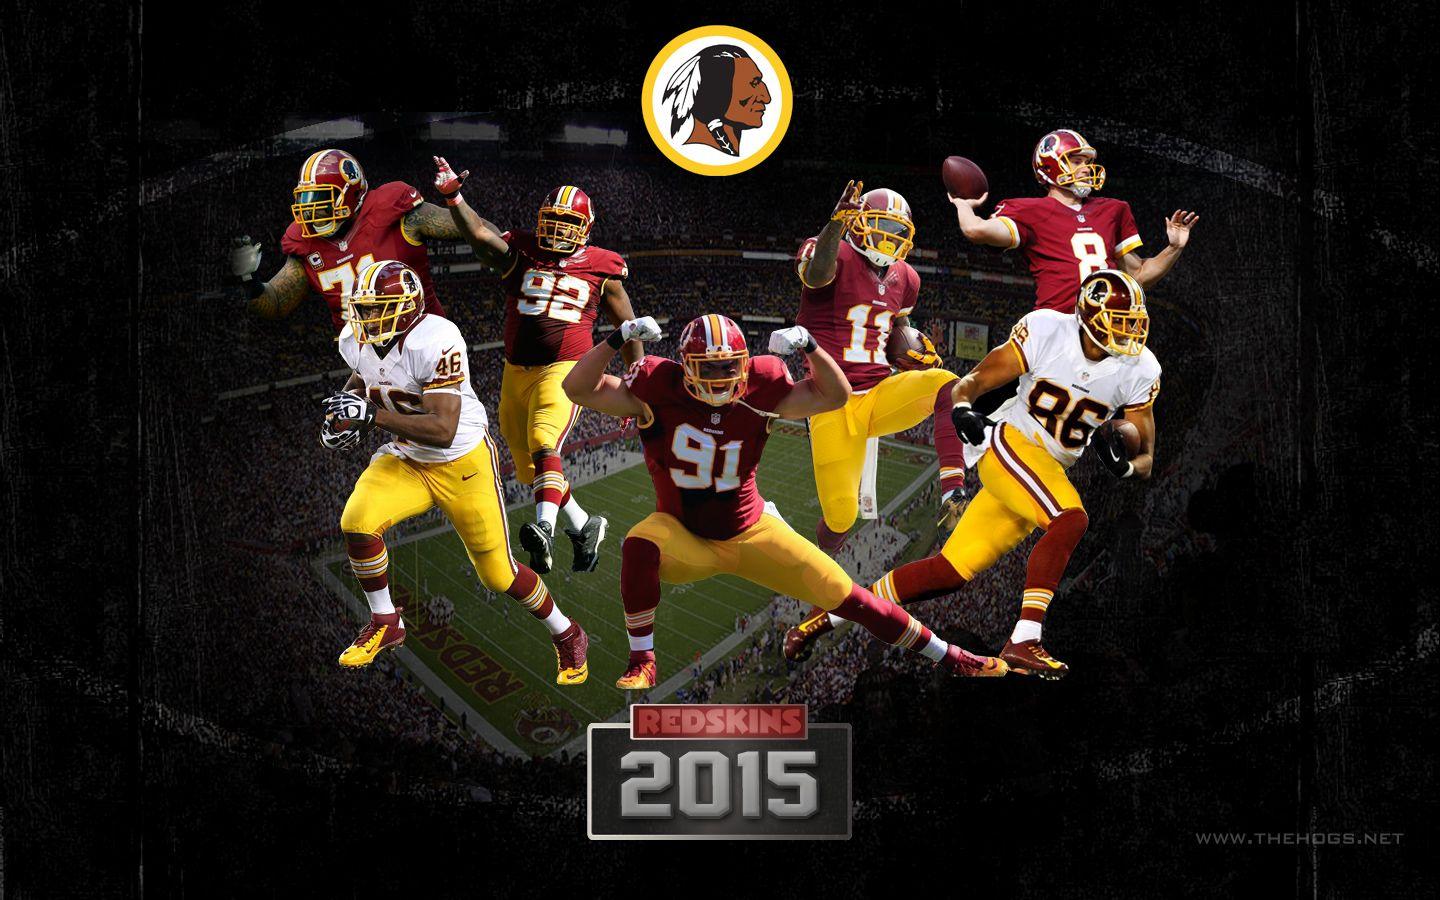 Washington Redskins wallpaper Recommend You This Great Picture